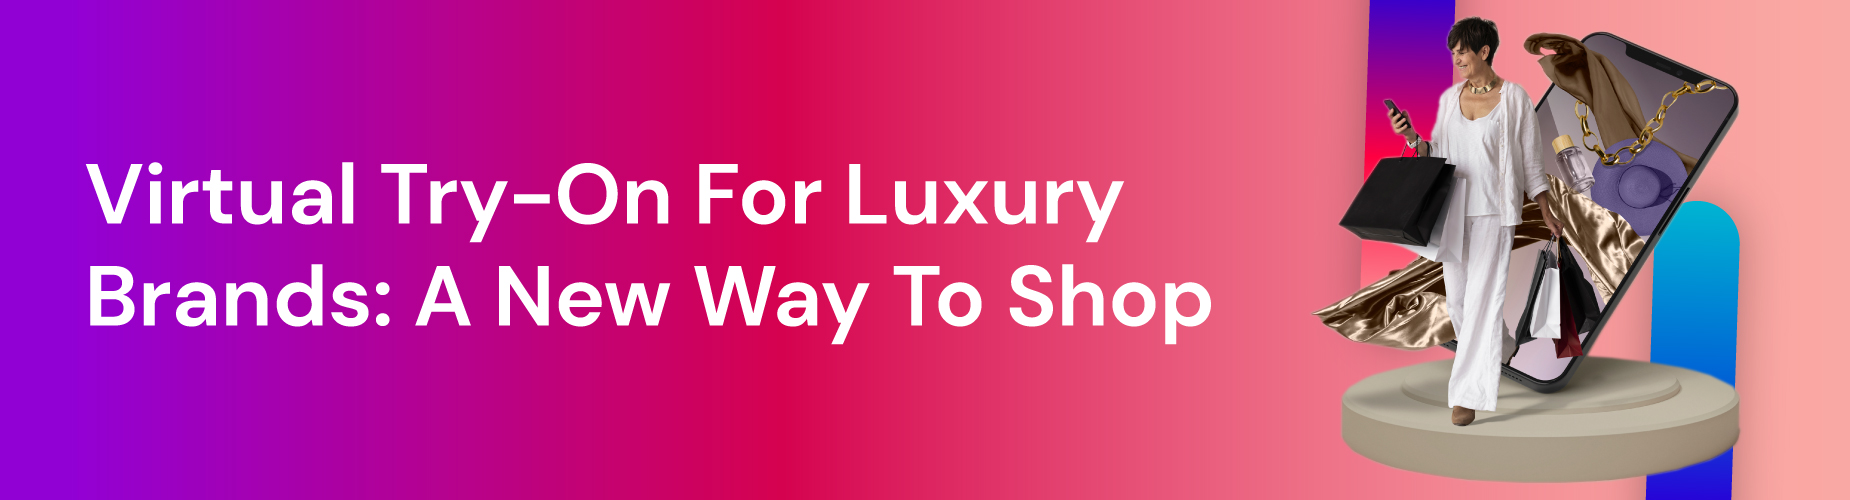 integrate Virtual Try-On For Luxury Brands